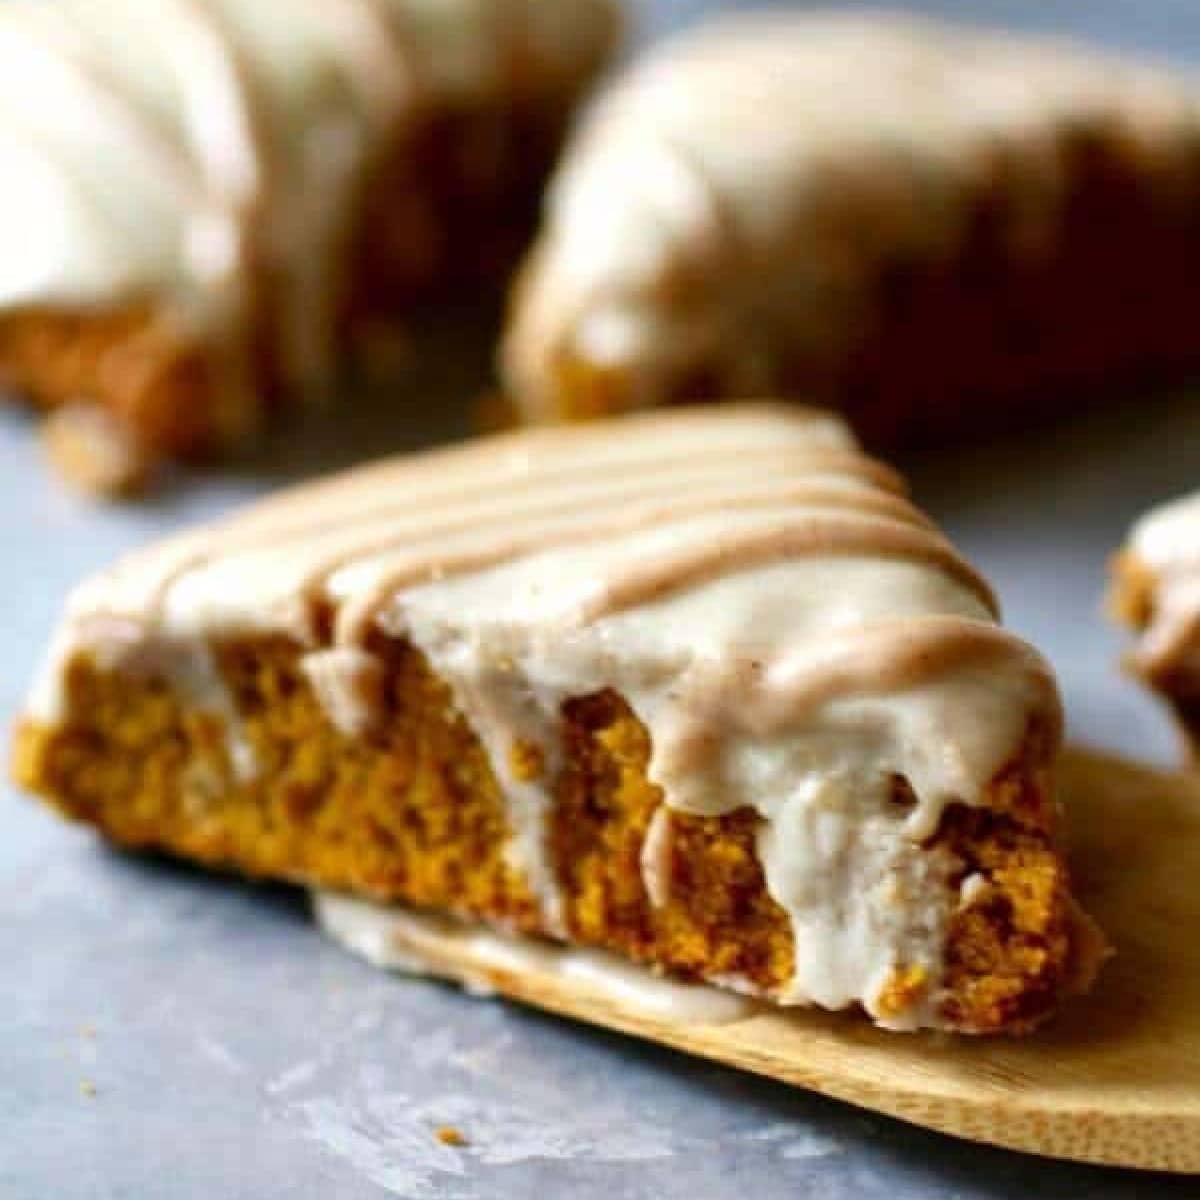 Baked pumpkin scones glazed with icing.